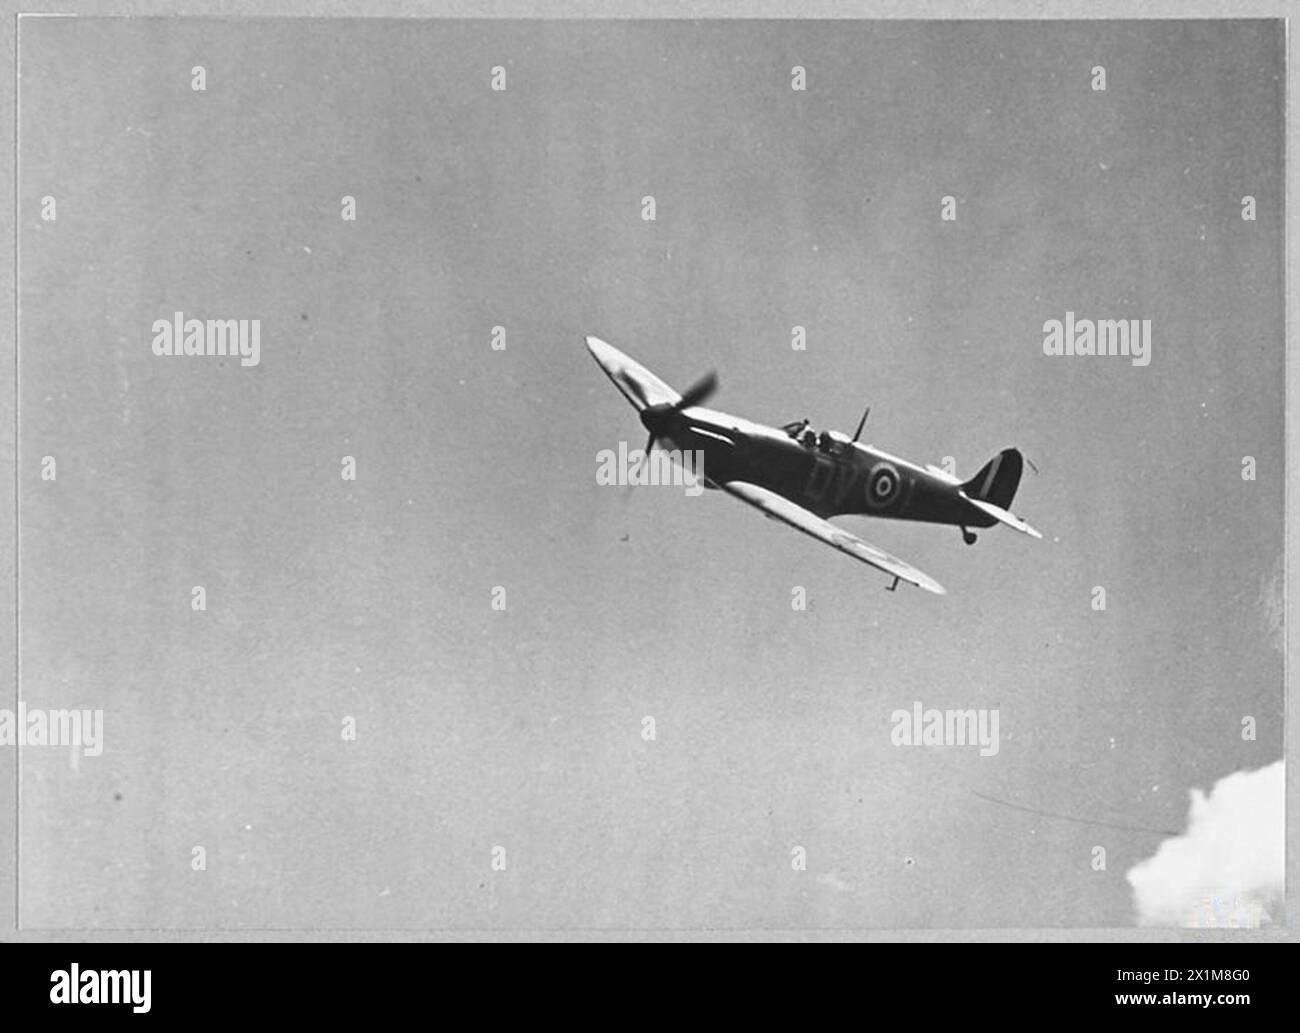 THE BATTLE OF BRITAIN 1940 - Spitfire Mk 1a X4474 QV-I of No. 19 Squadron in flight, and banking to port, Royal Air Force, 19 Squadron Stock Photo